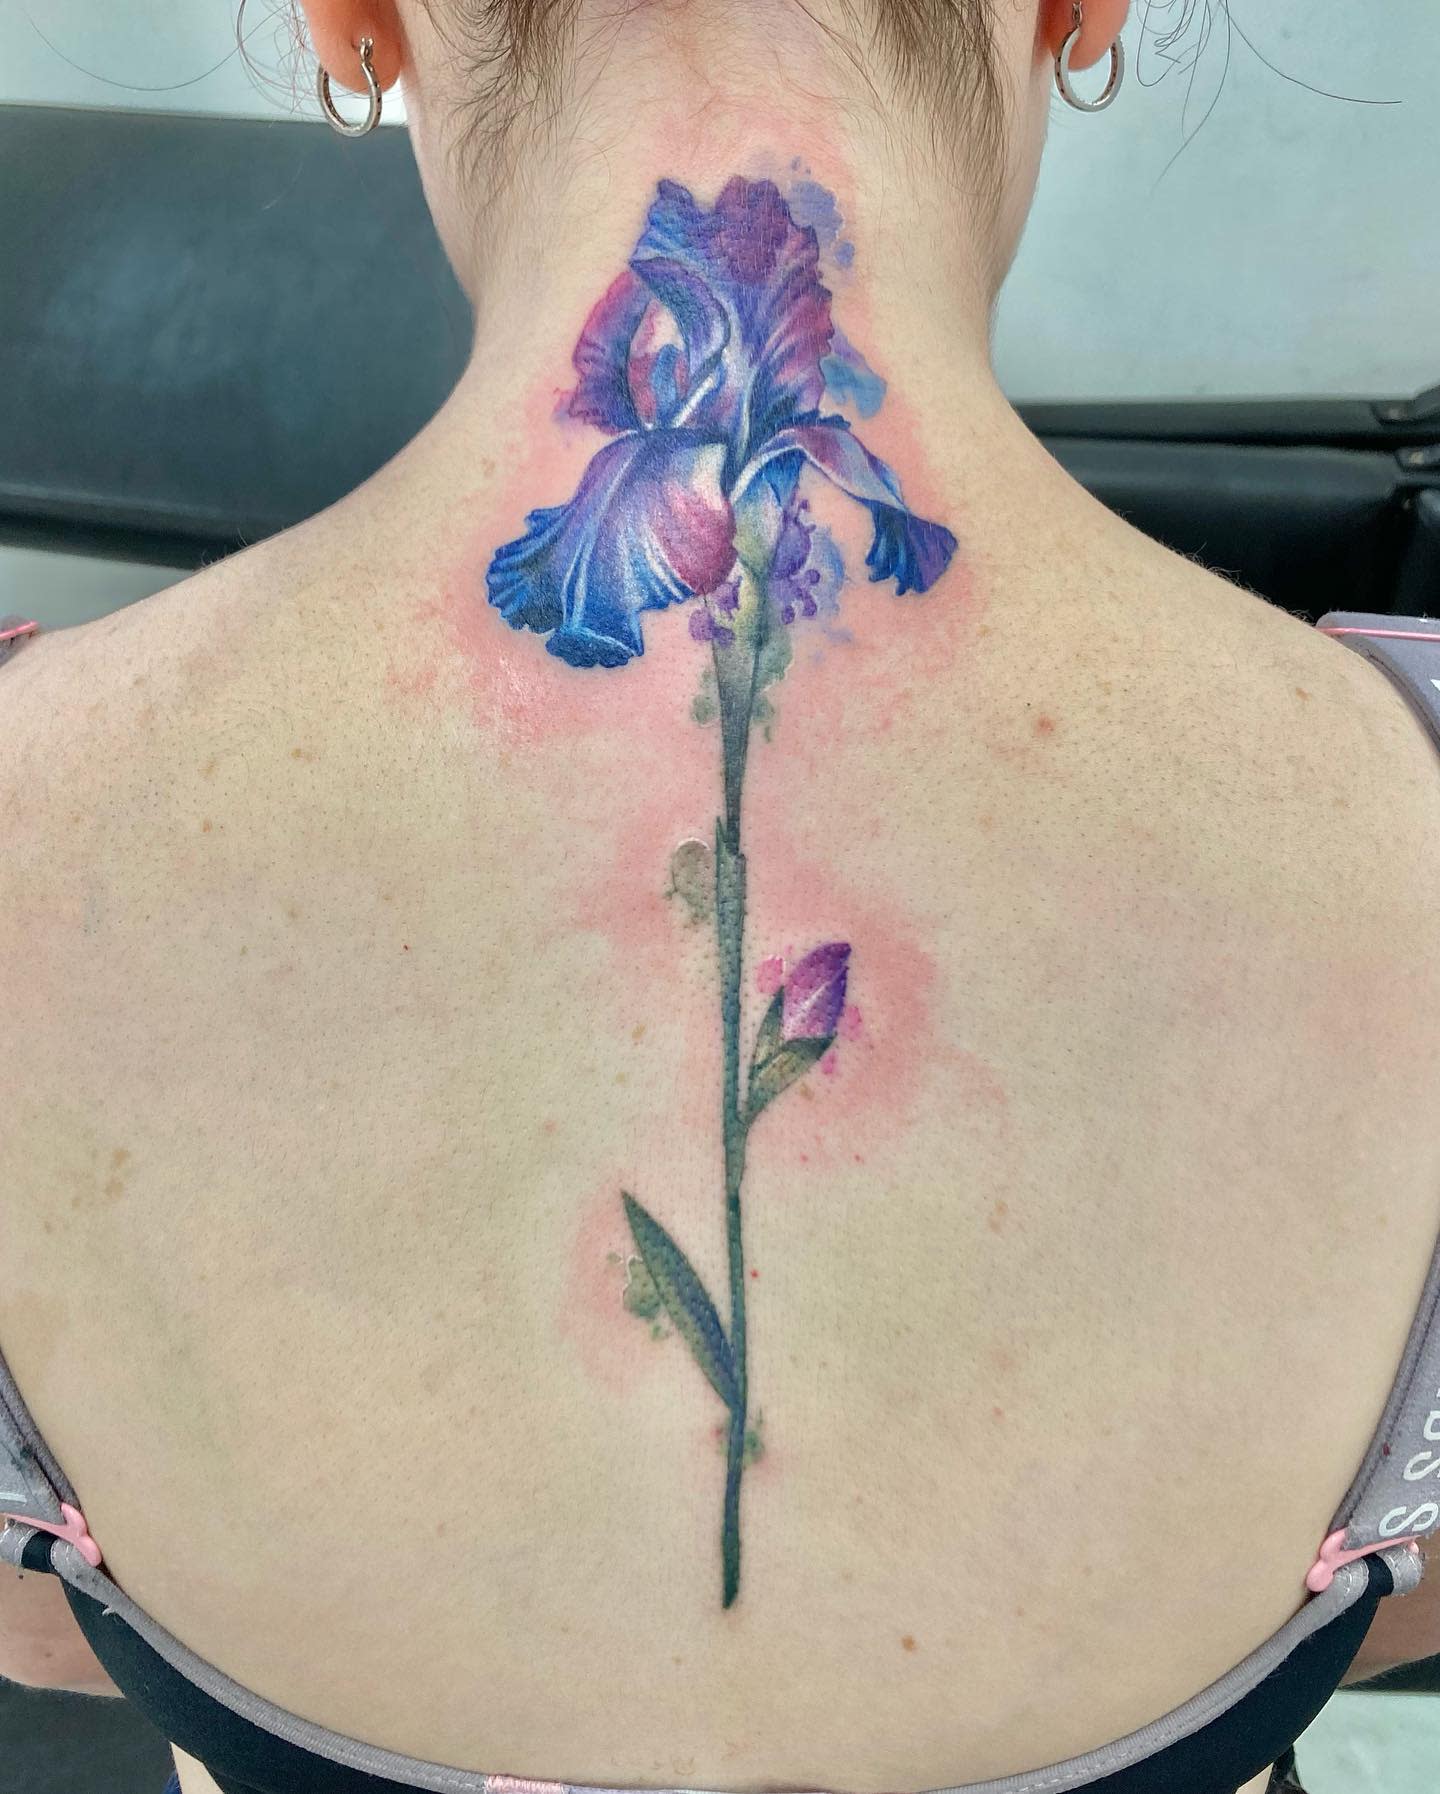 Iris Flower Tattoos Meanings  Designs to Accessorize  TattoosWin